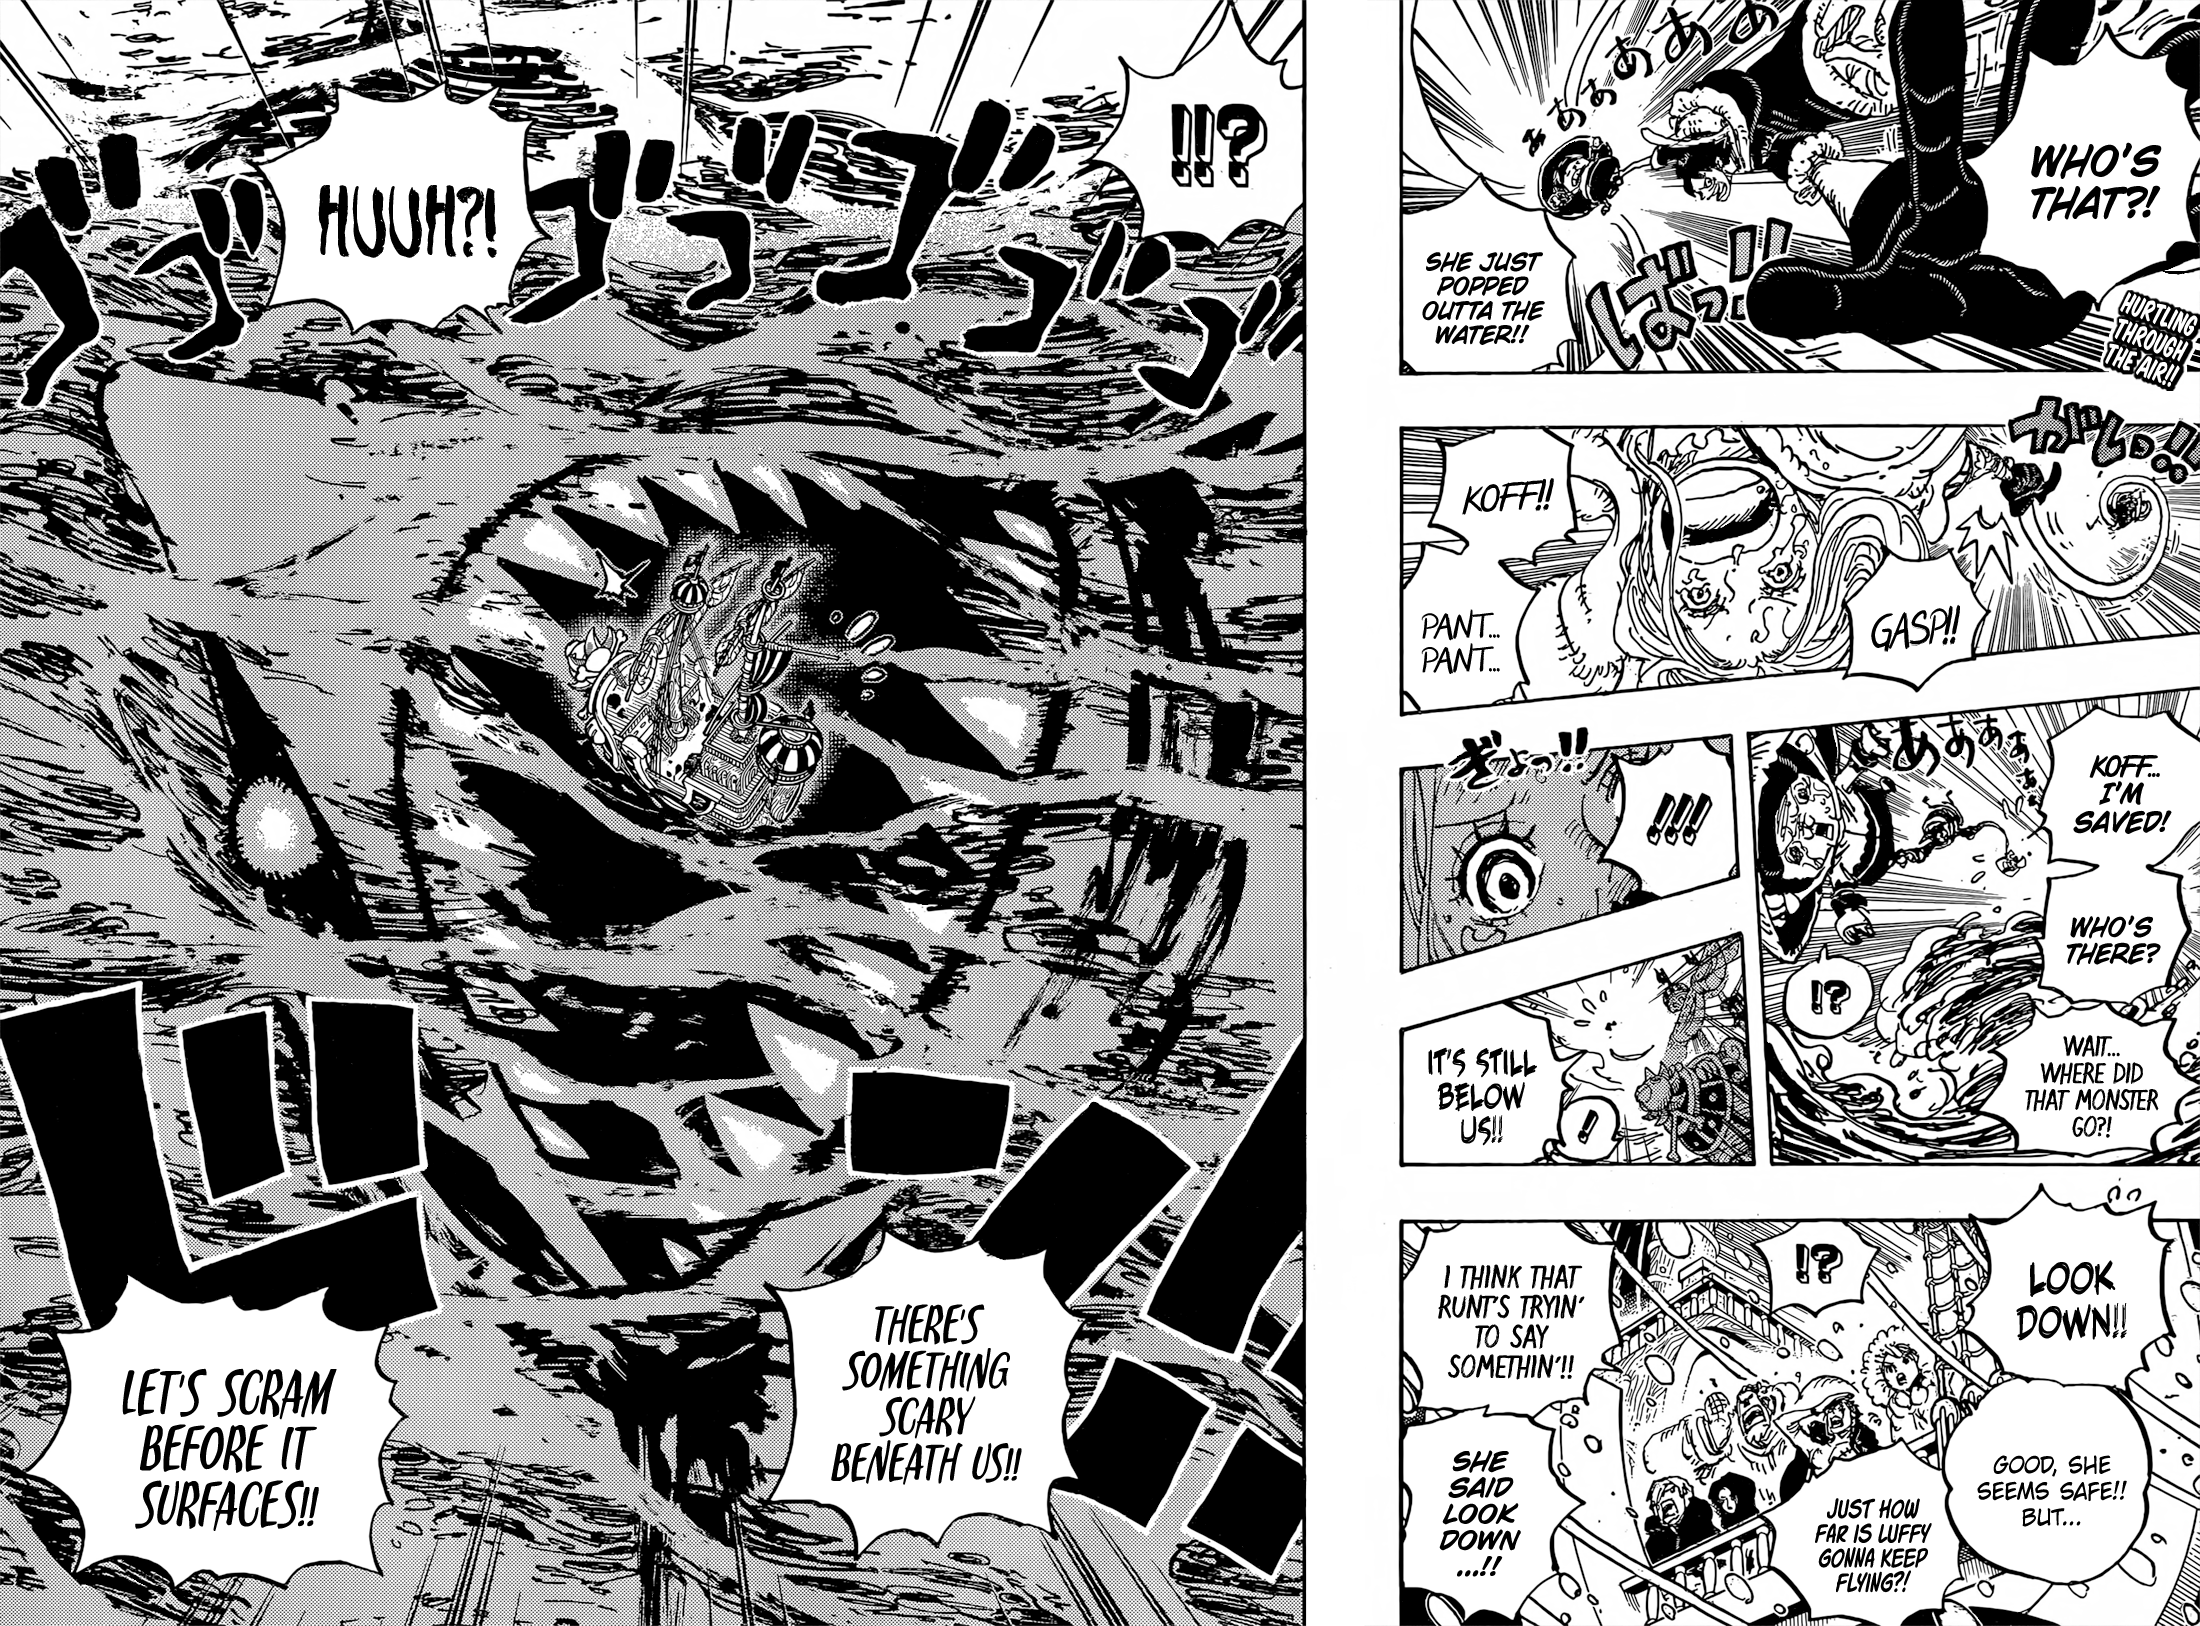 First One Piece Chapter 1061 hints have fandom on edge